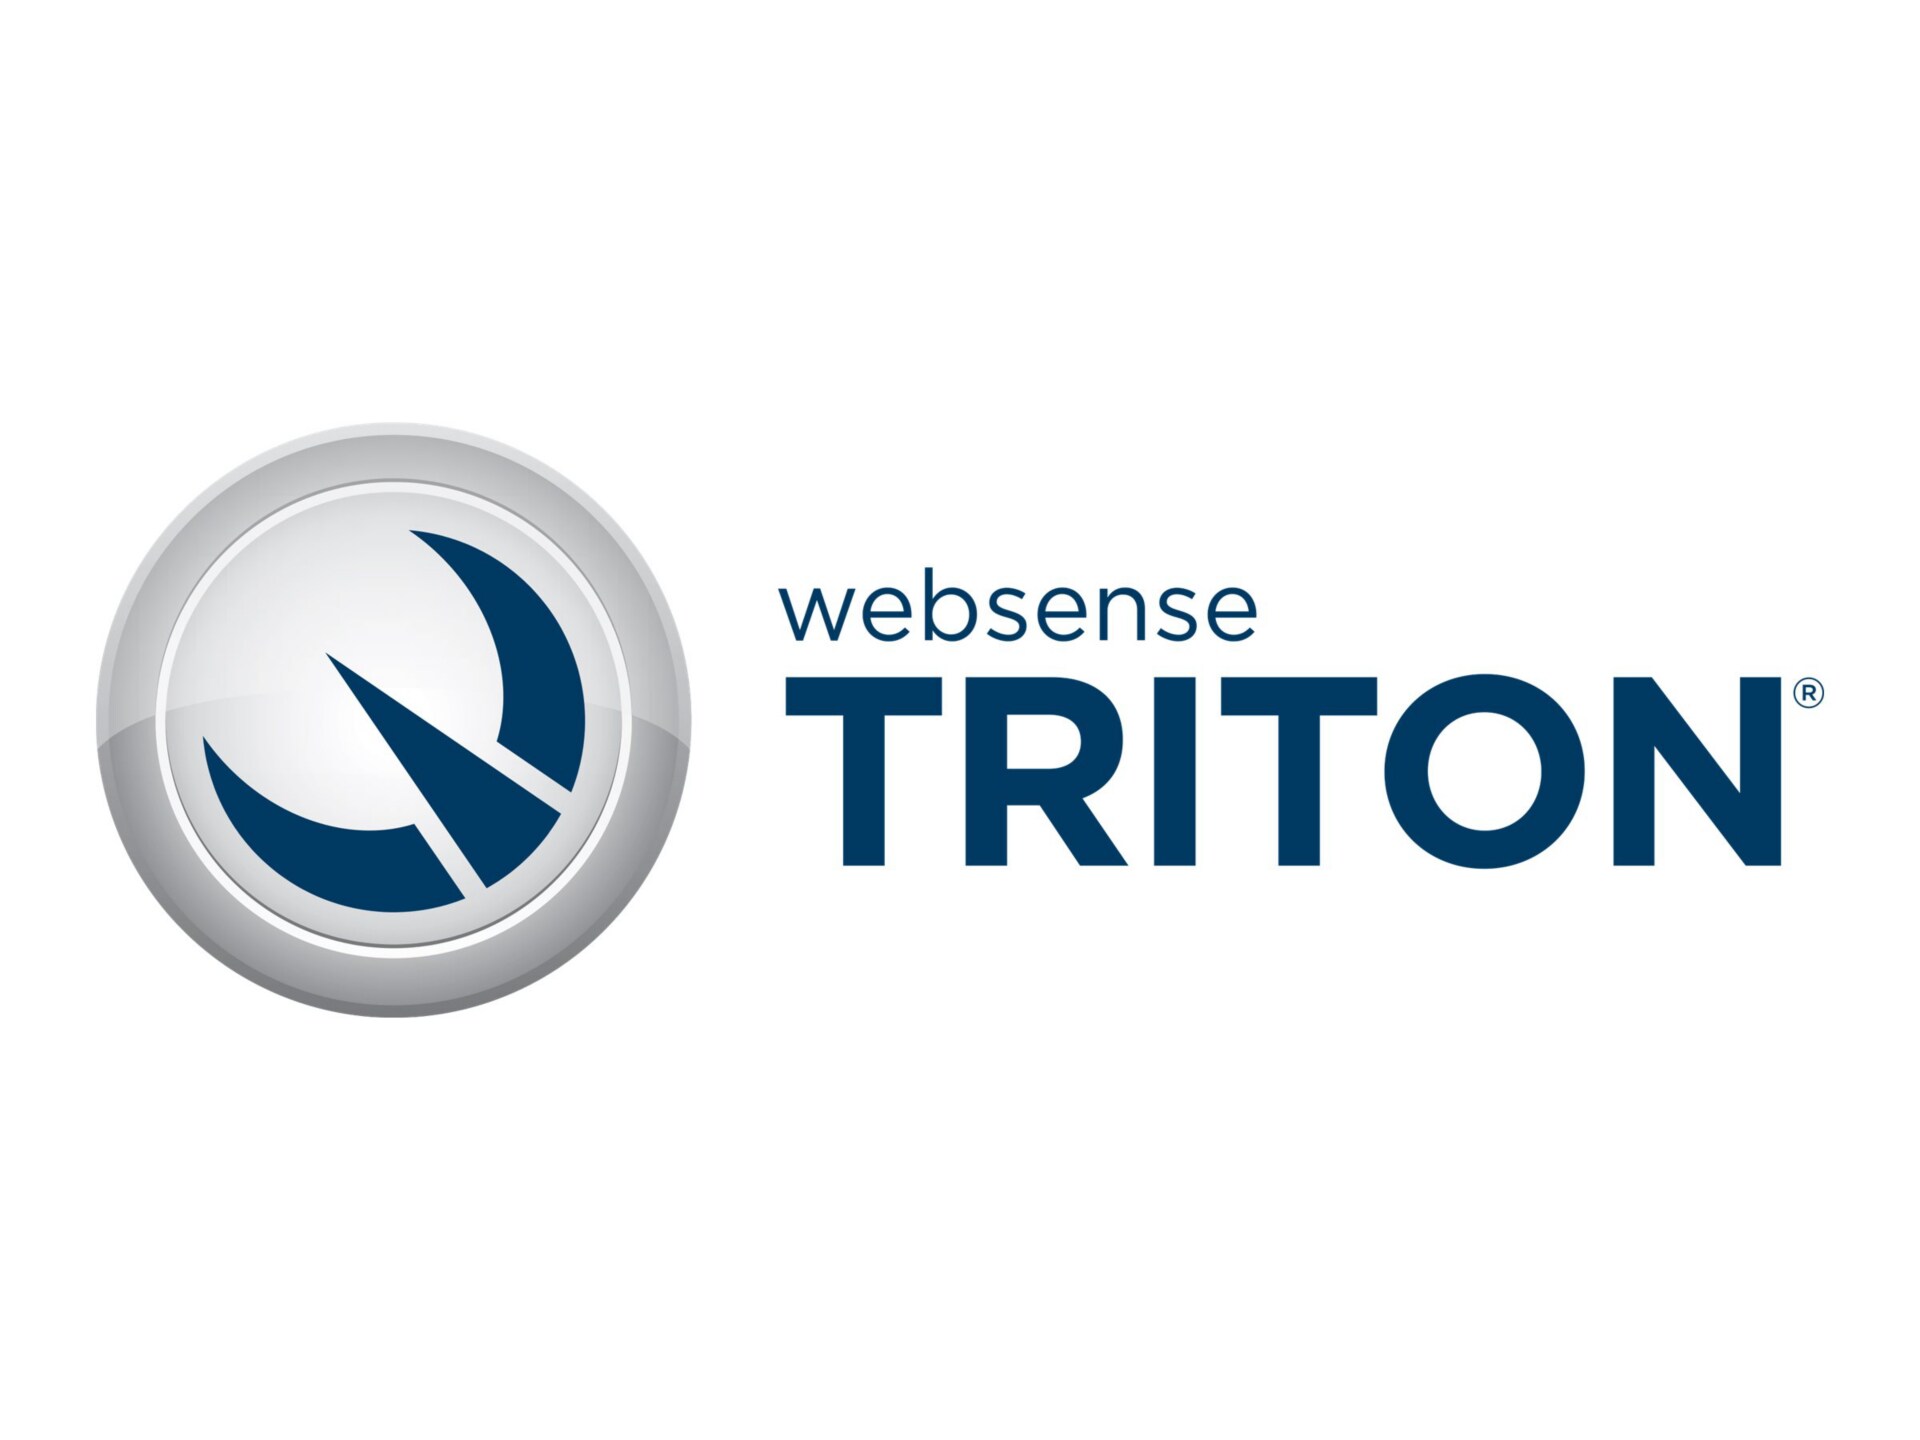 TRITON Security Gateway Anywhere - subscription license renewal (1 year) -